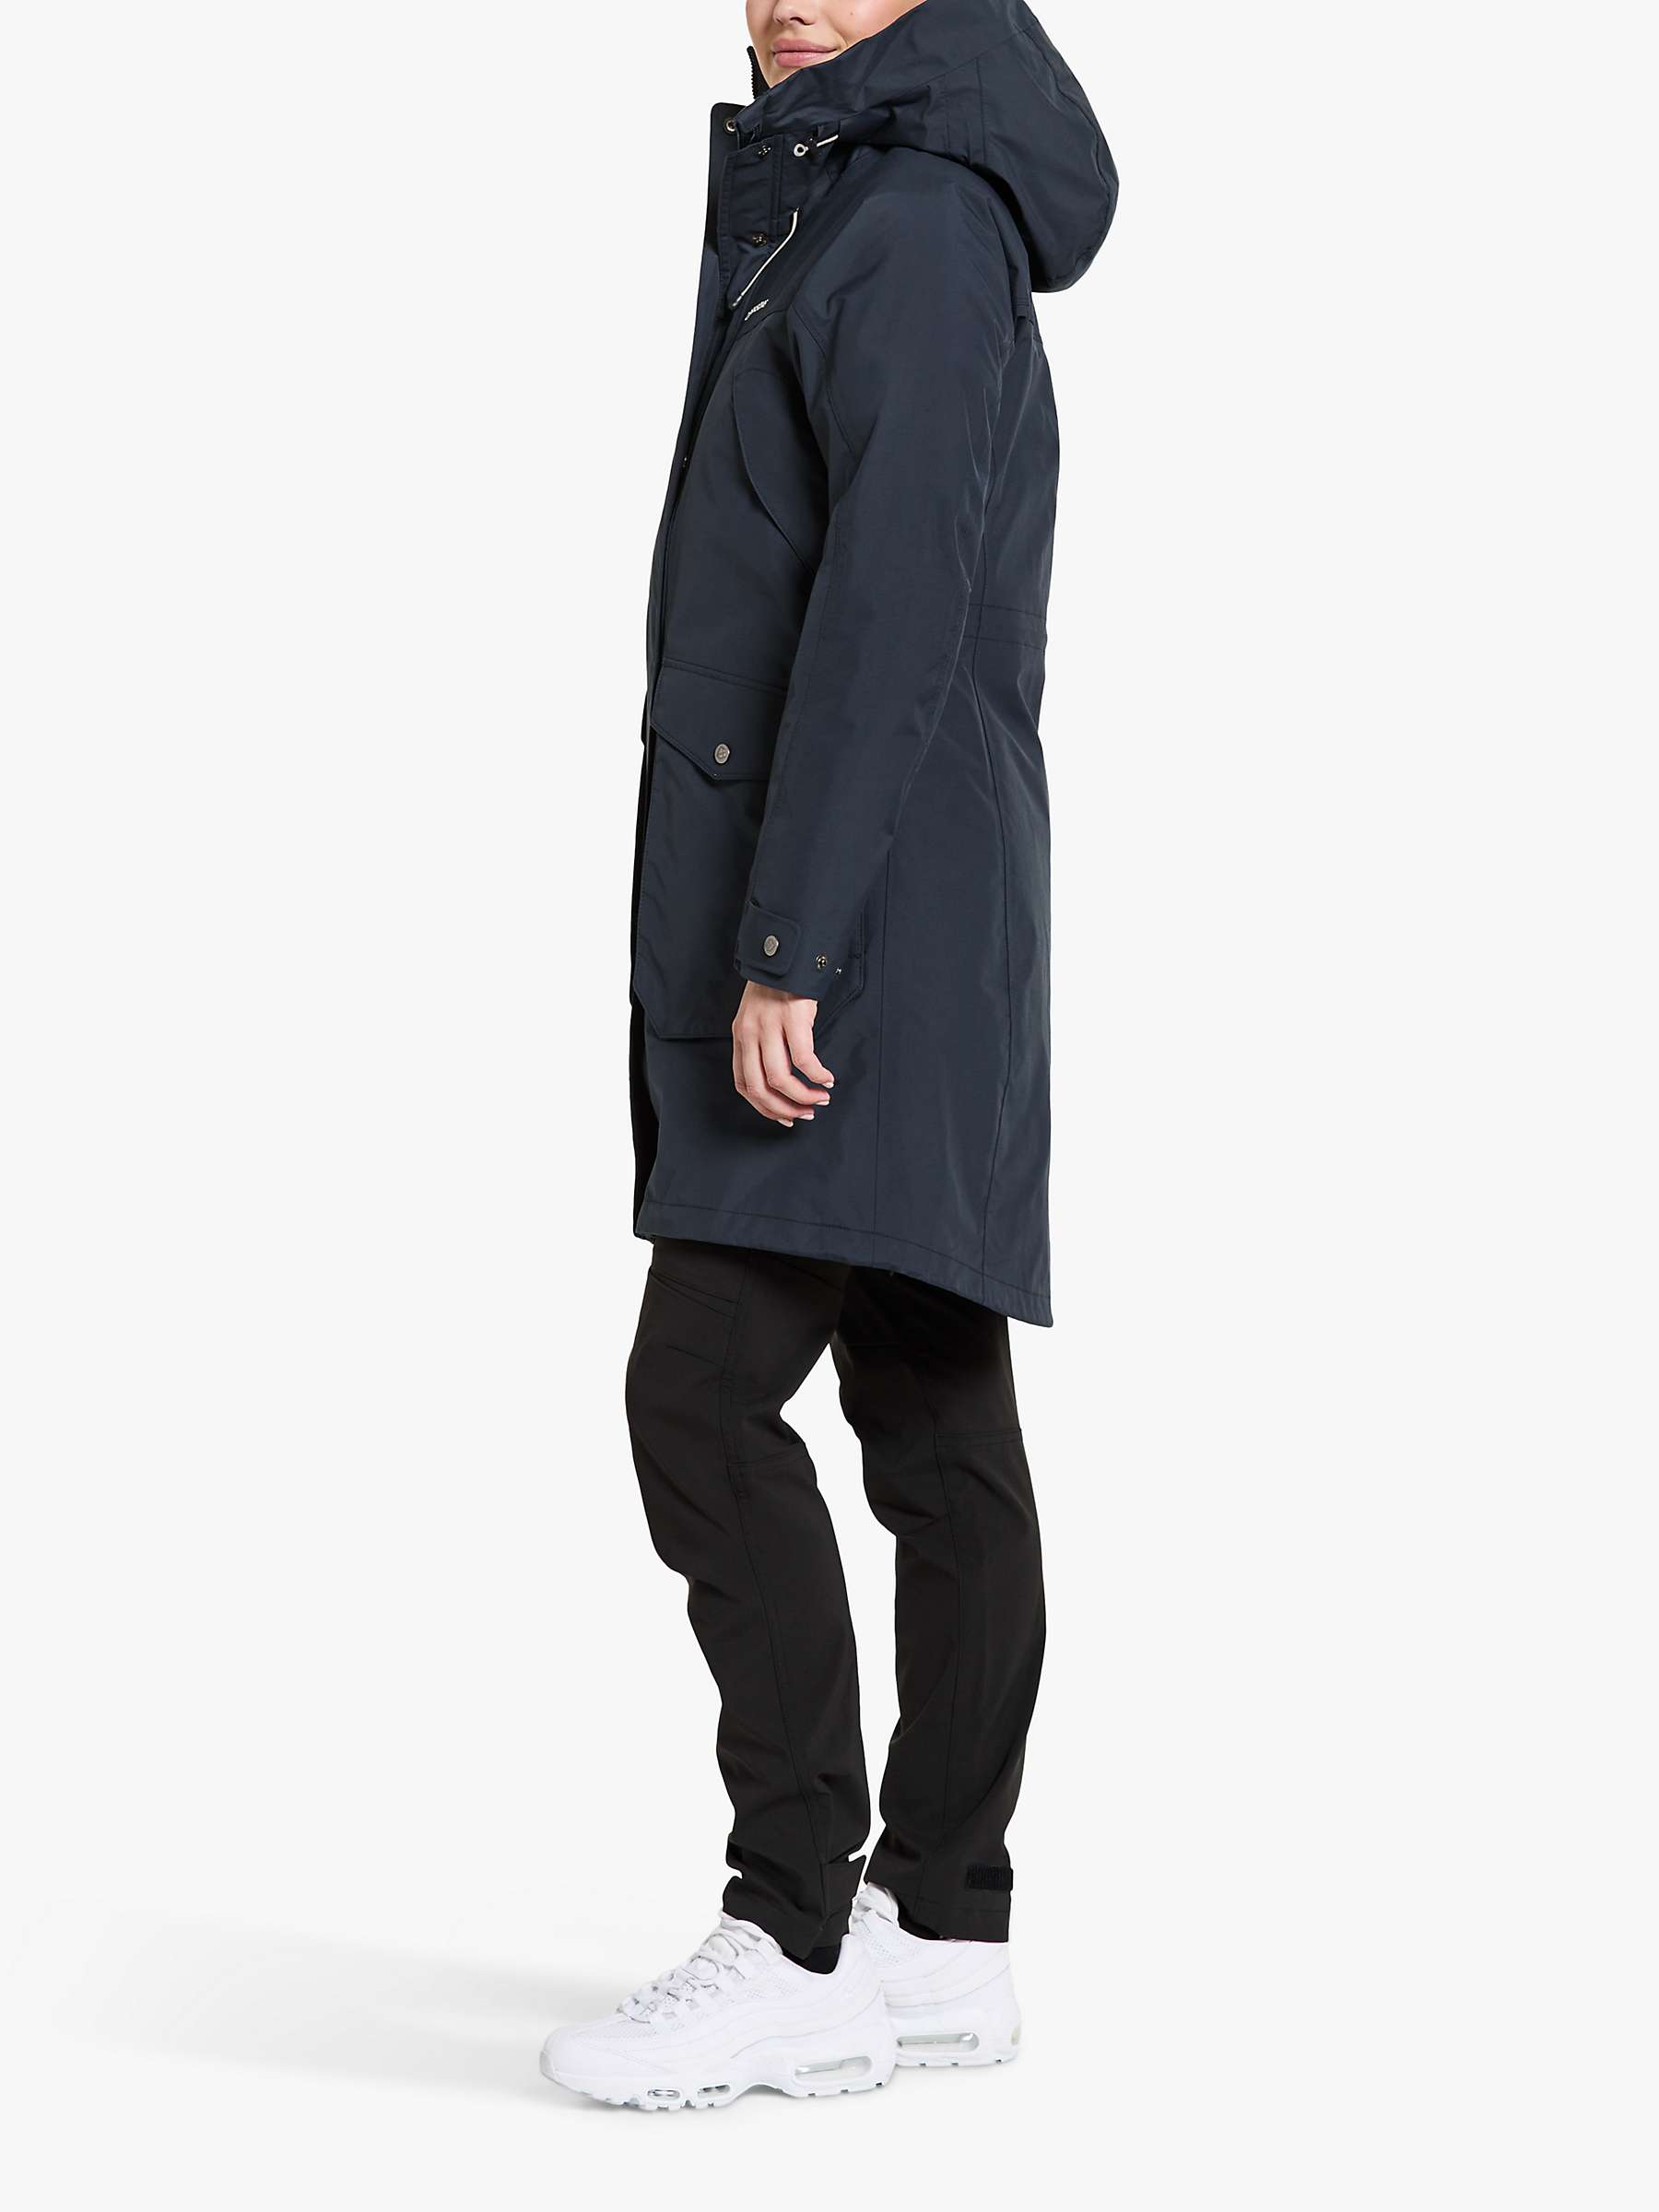 Buy Didriksons Thelma Parka Jacket Online at johnlewis.com